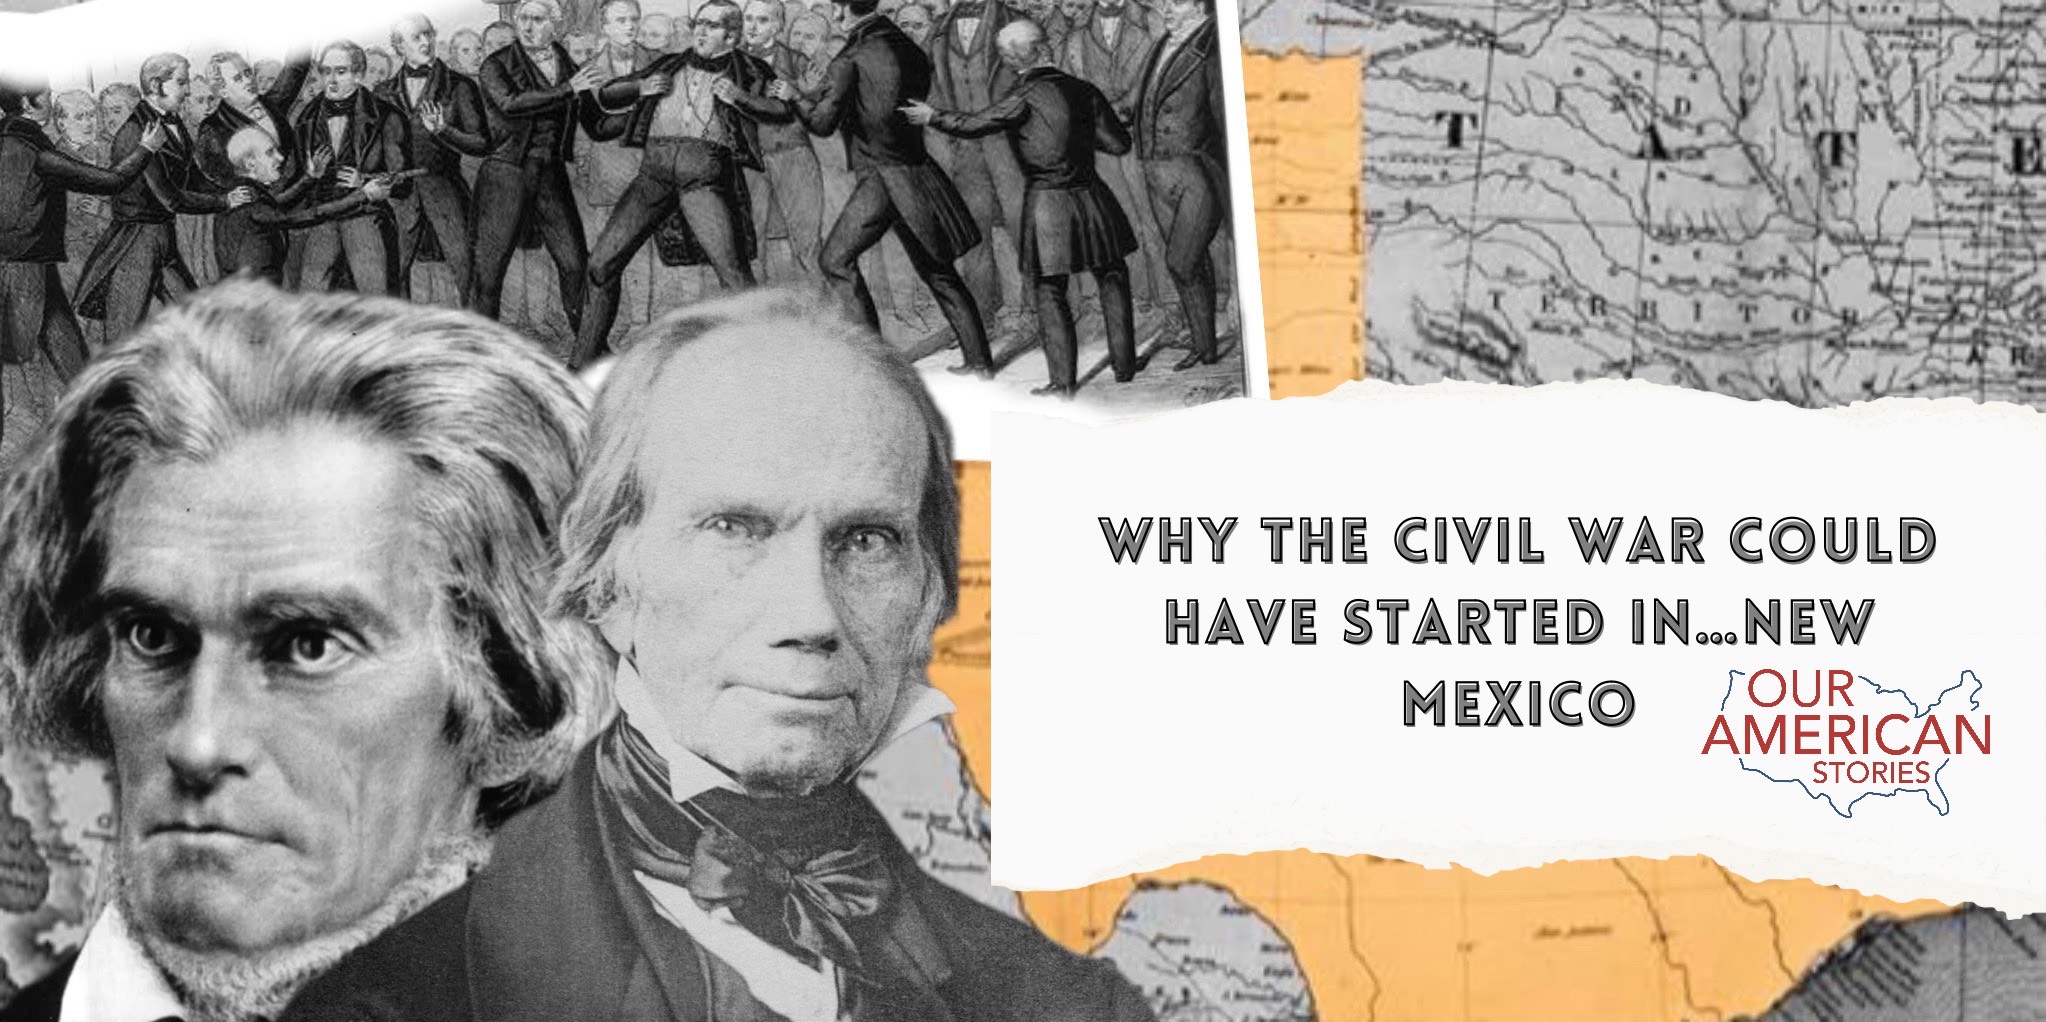 Why The Civil War Could Have Started In New Mexico... in 1850